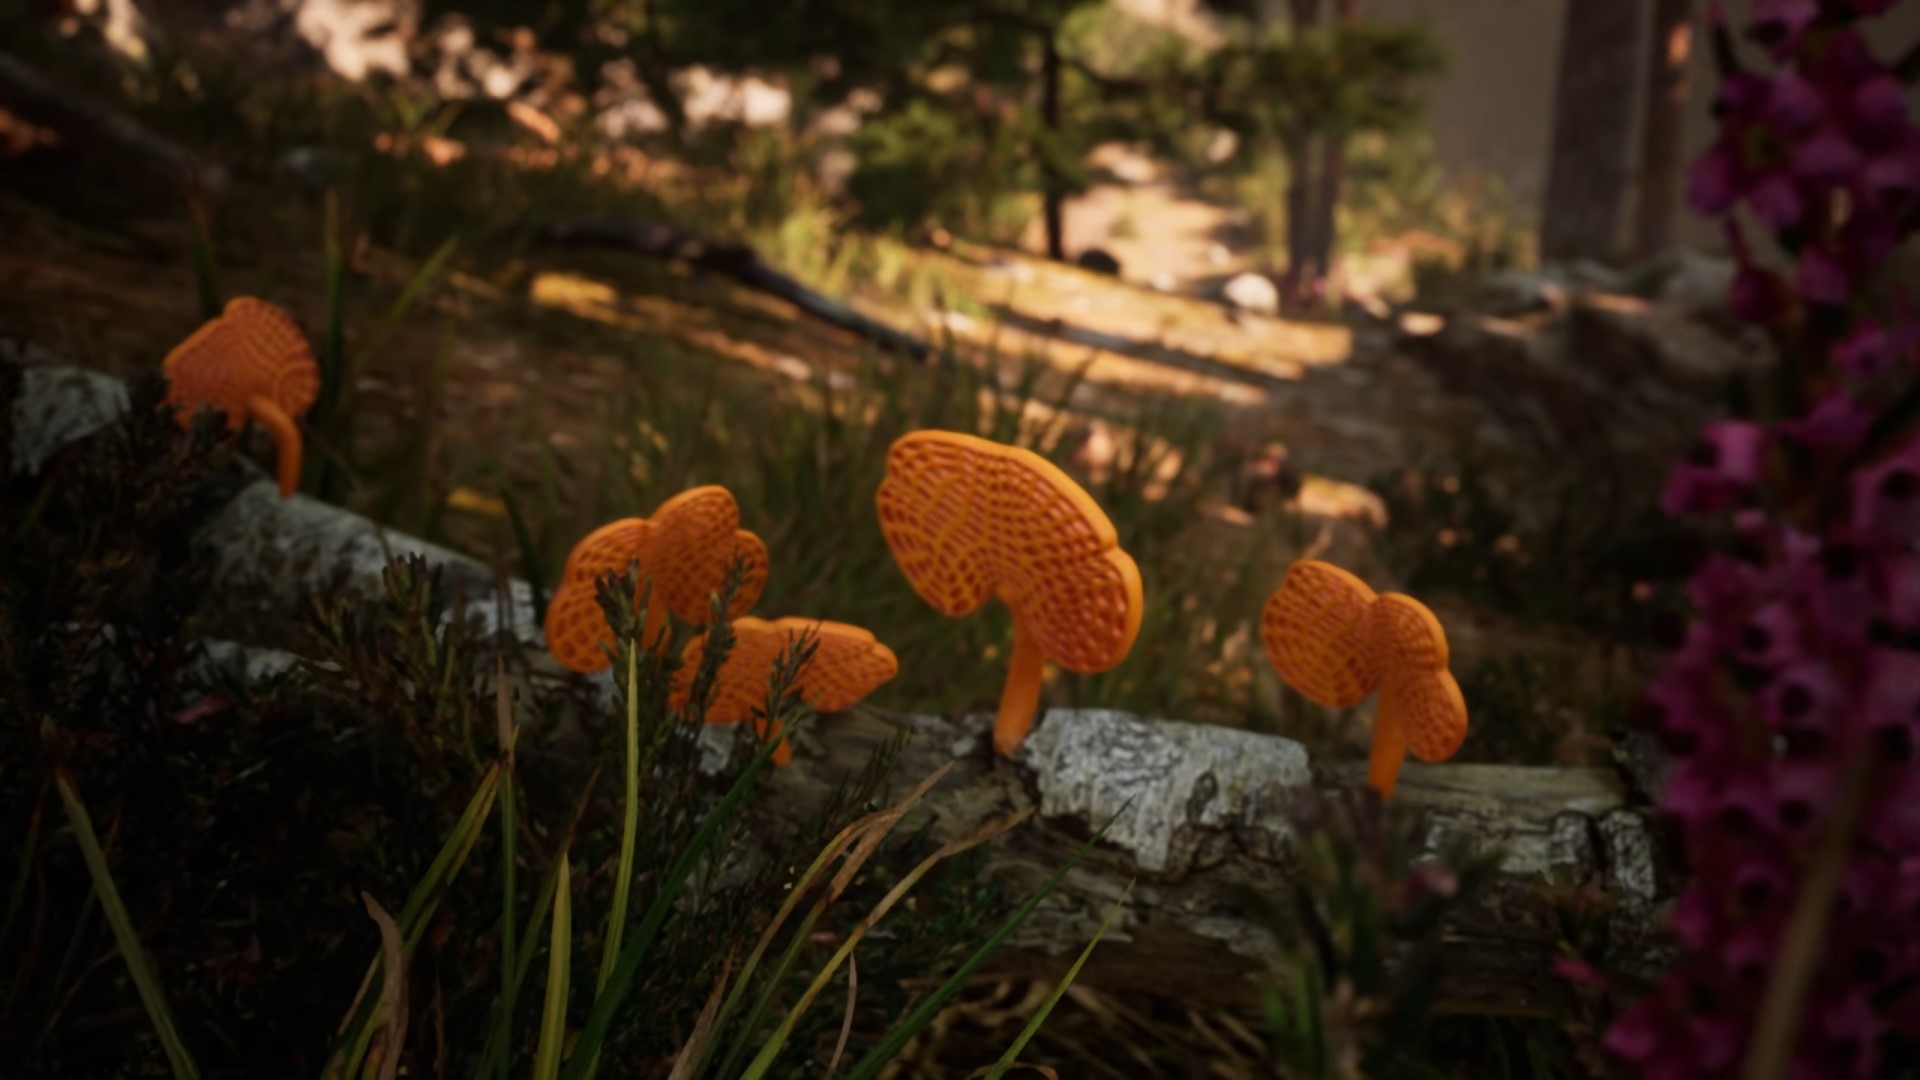 Hunt for mushrooms and take wildlife snapshots in this new sim